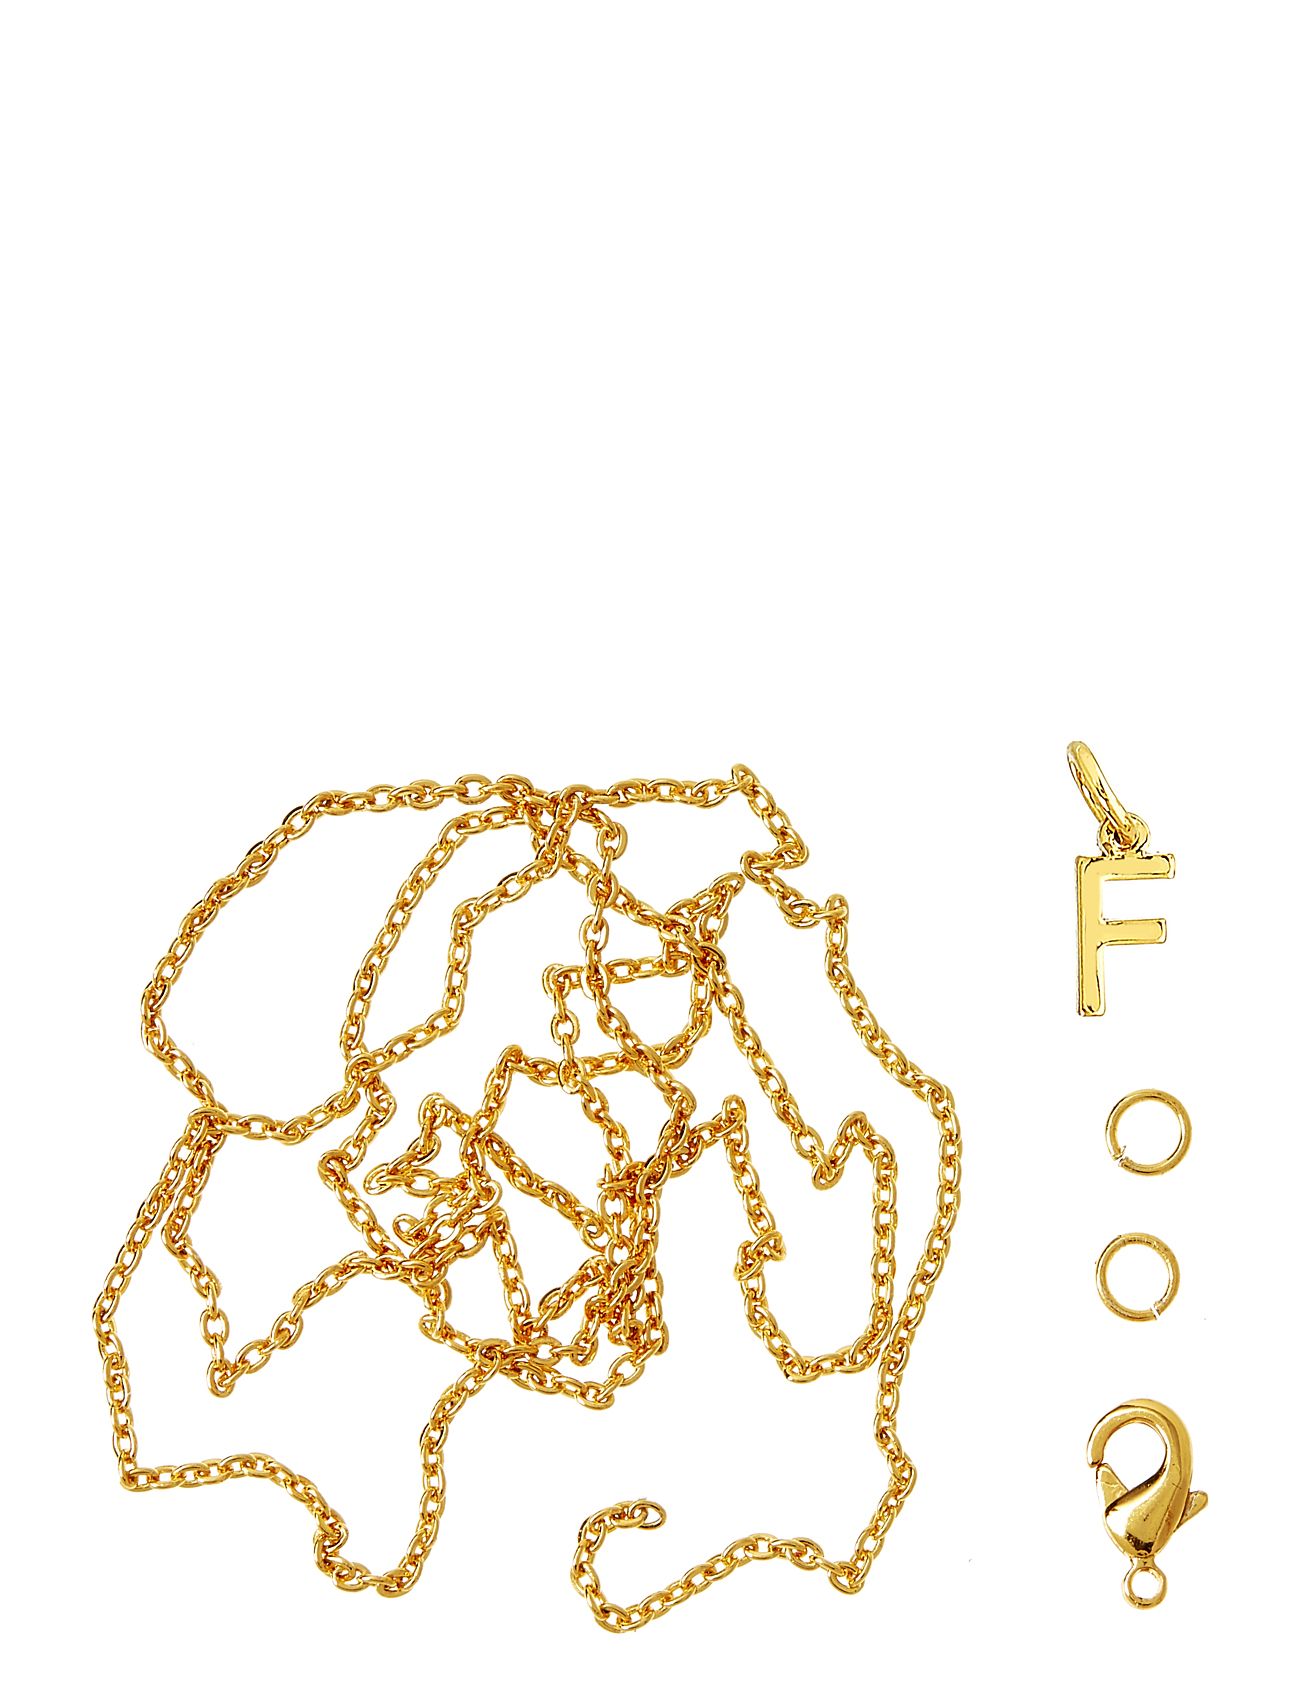 Letter F Gp With O-Ring, Chain And Clasp Toys Creativity Drawing & Crafts Craft Jewellery & Accessories Gold Me & My Box